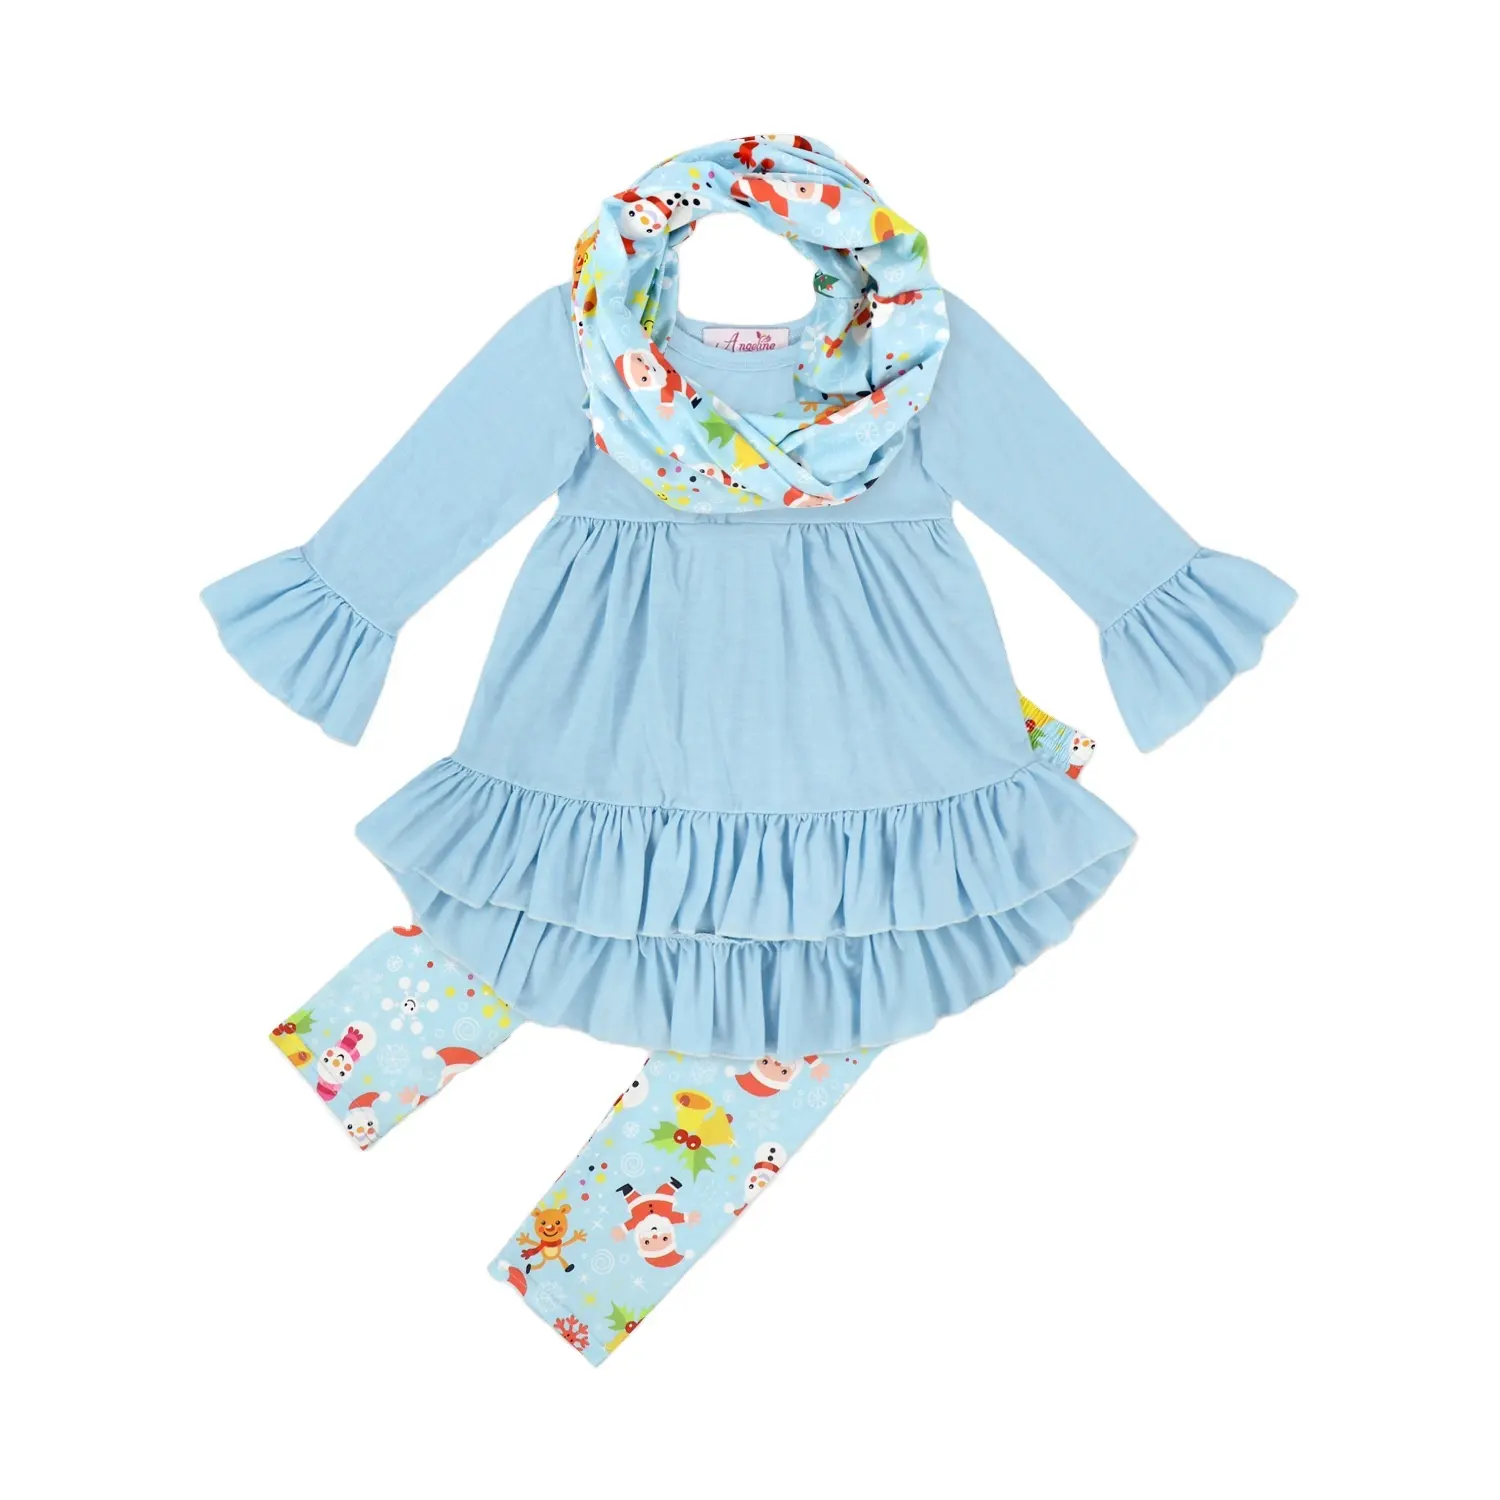 Wholesale Boutique Girl Clothing set Kids Christmas scarf outfit